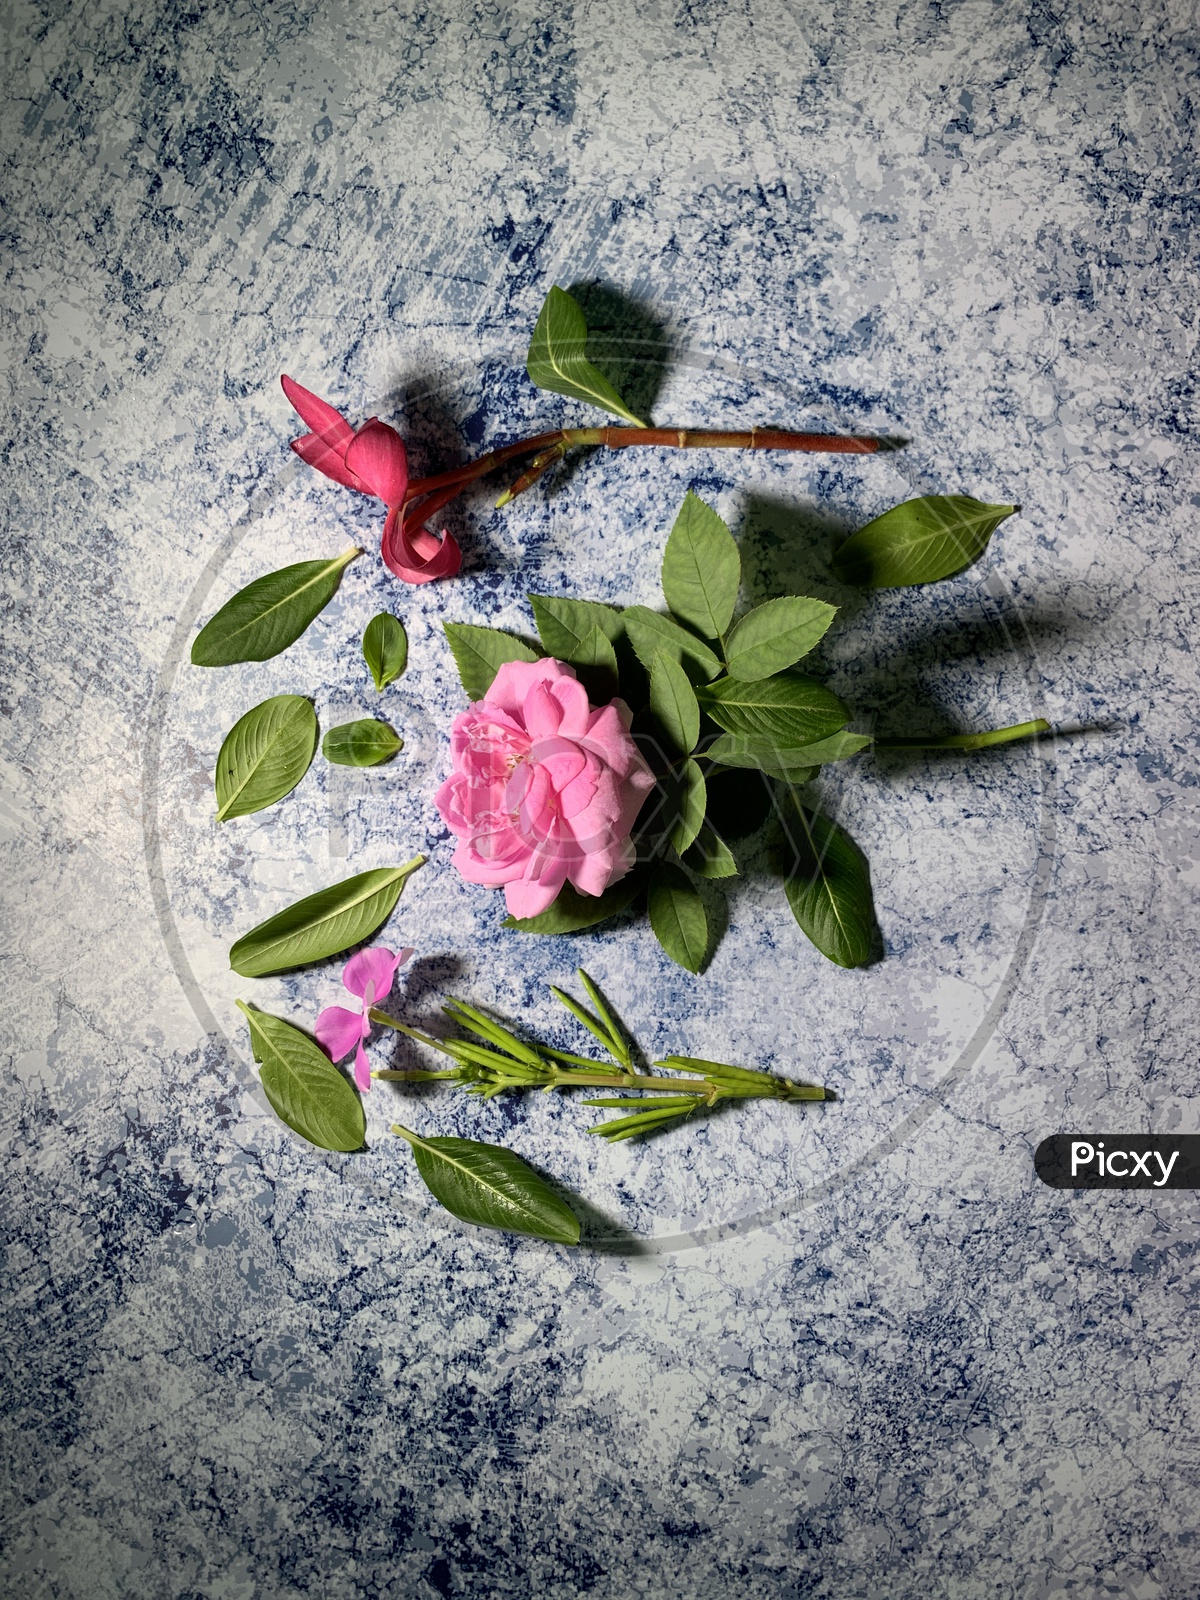 Fresh Blooming Flowers On an Texture Marble Floor Background